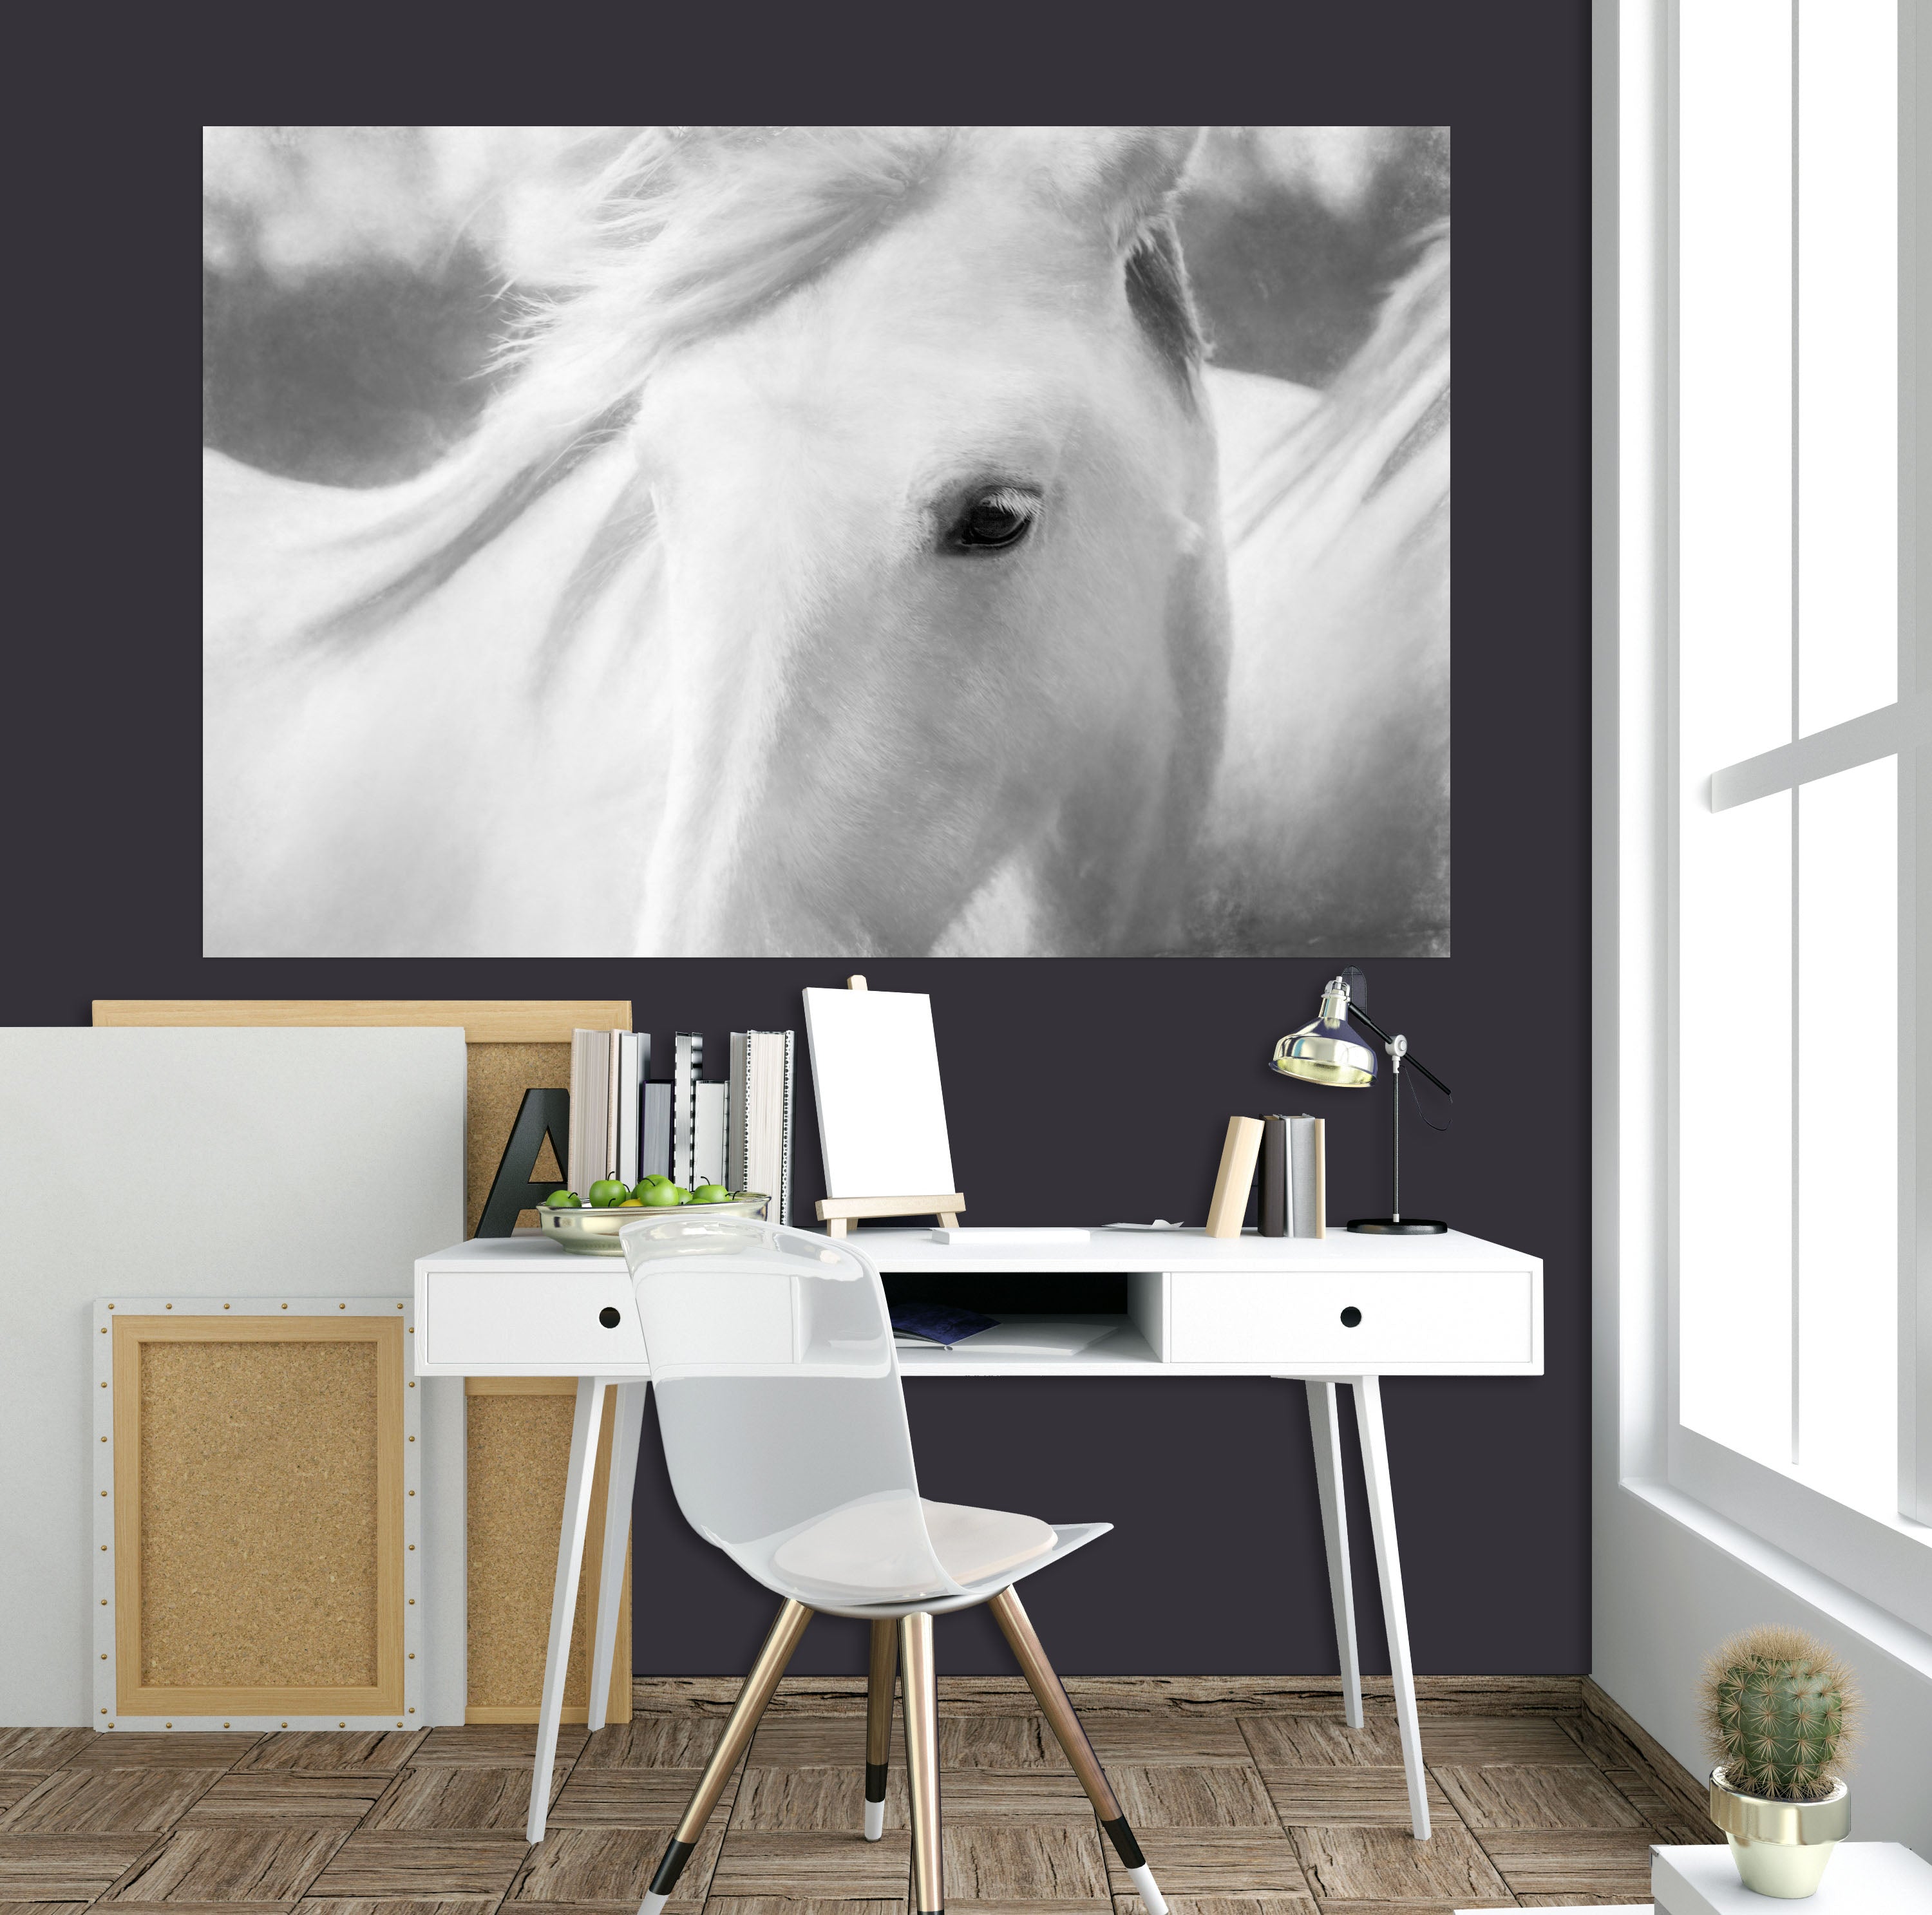 3D White Horse 142 Marco Carmassi Wall Sticker